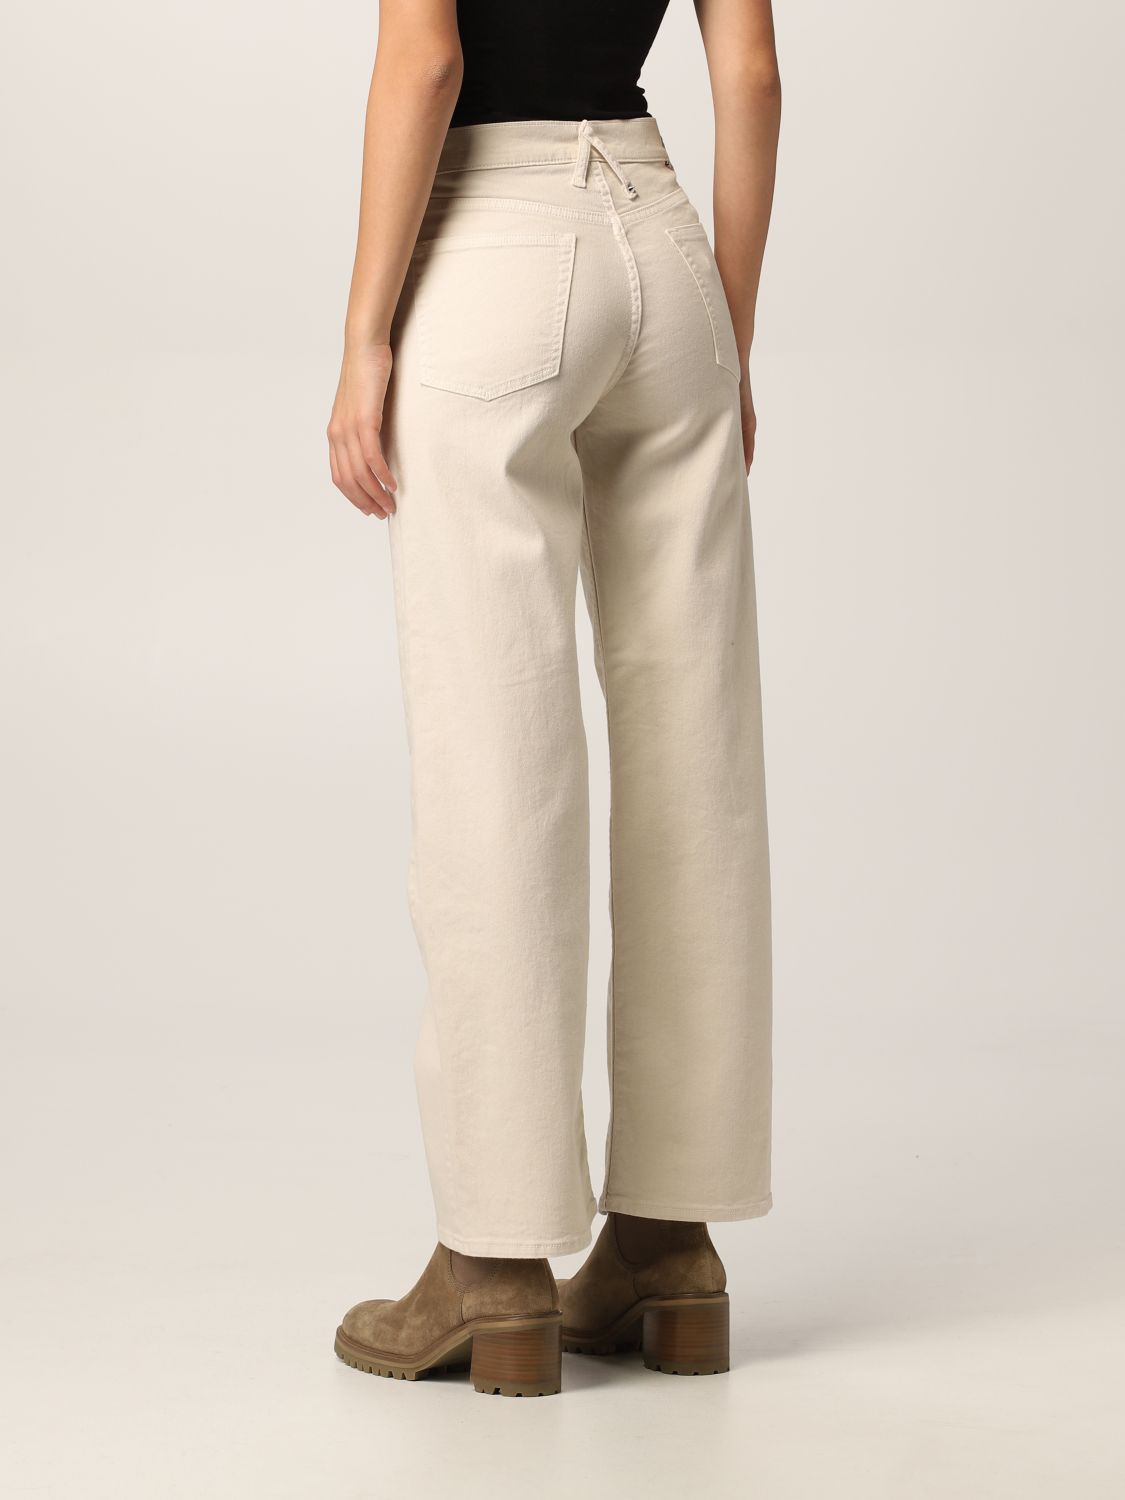 Jeans Cycle: Pants women Cycle yellow cream 2